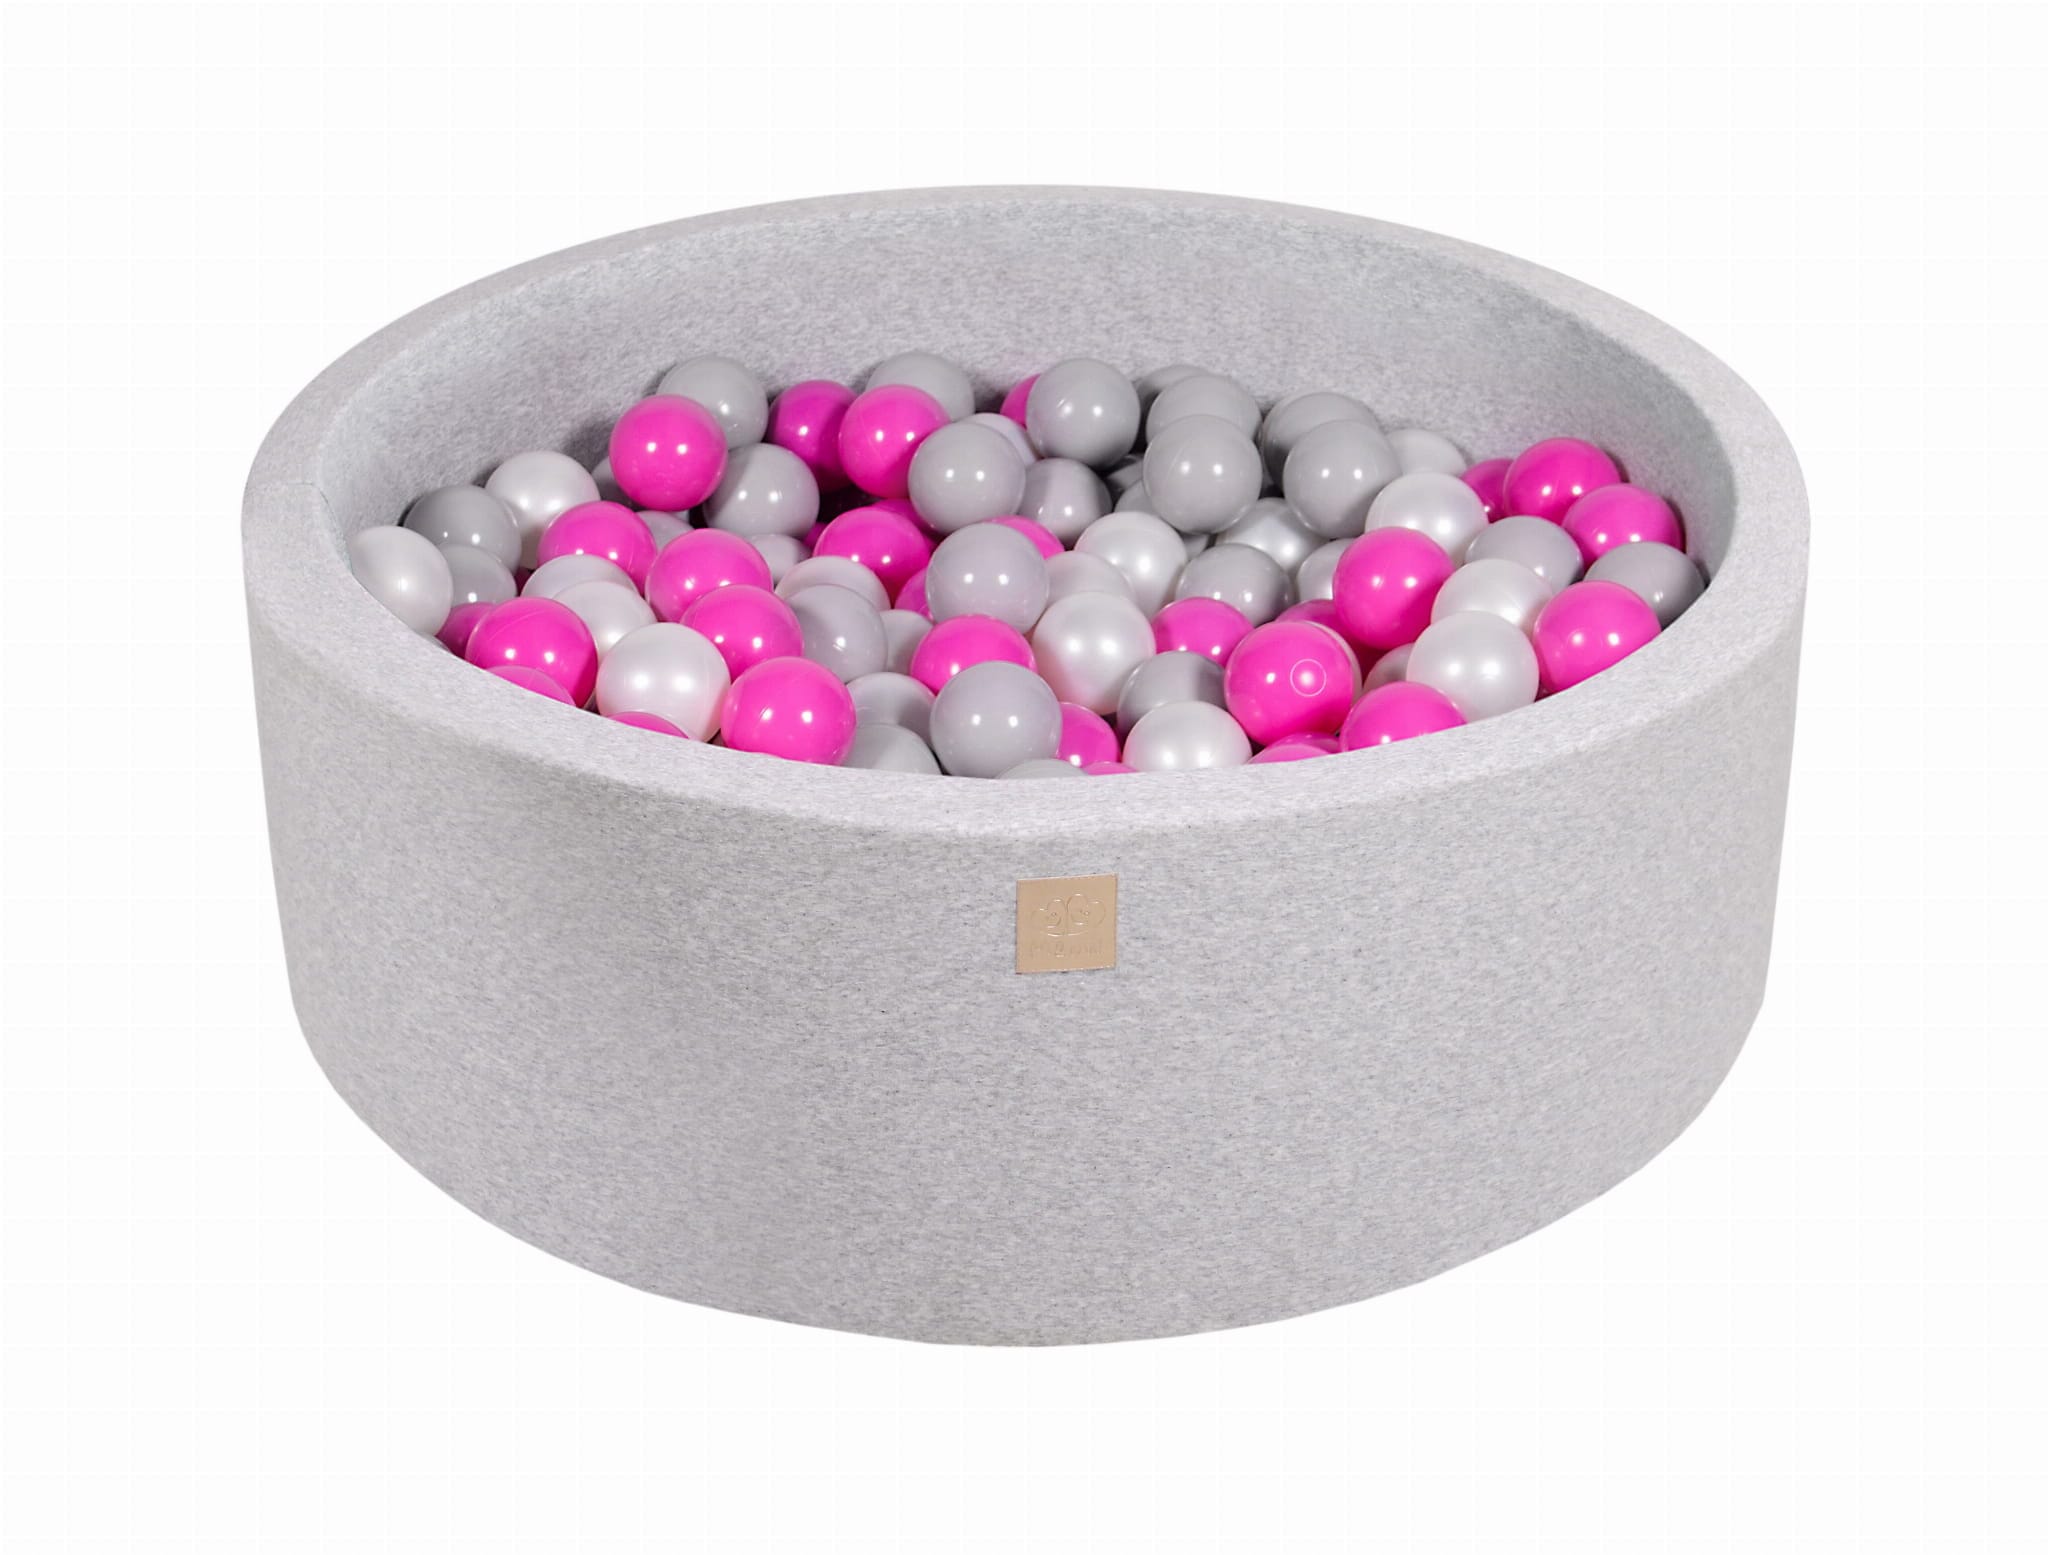 Luxury Cotton Round Ball Pit - Bold 'n Bubbly For Kids By MeowBaby